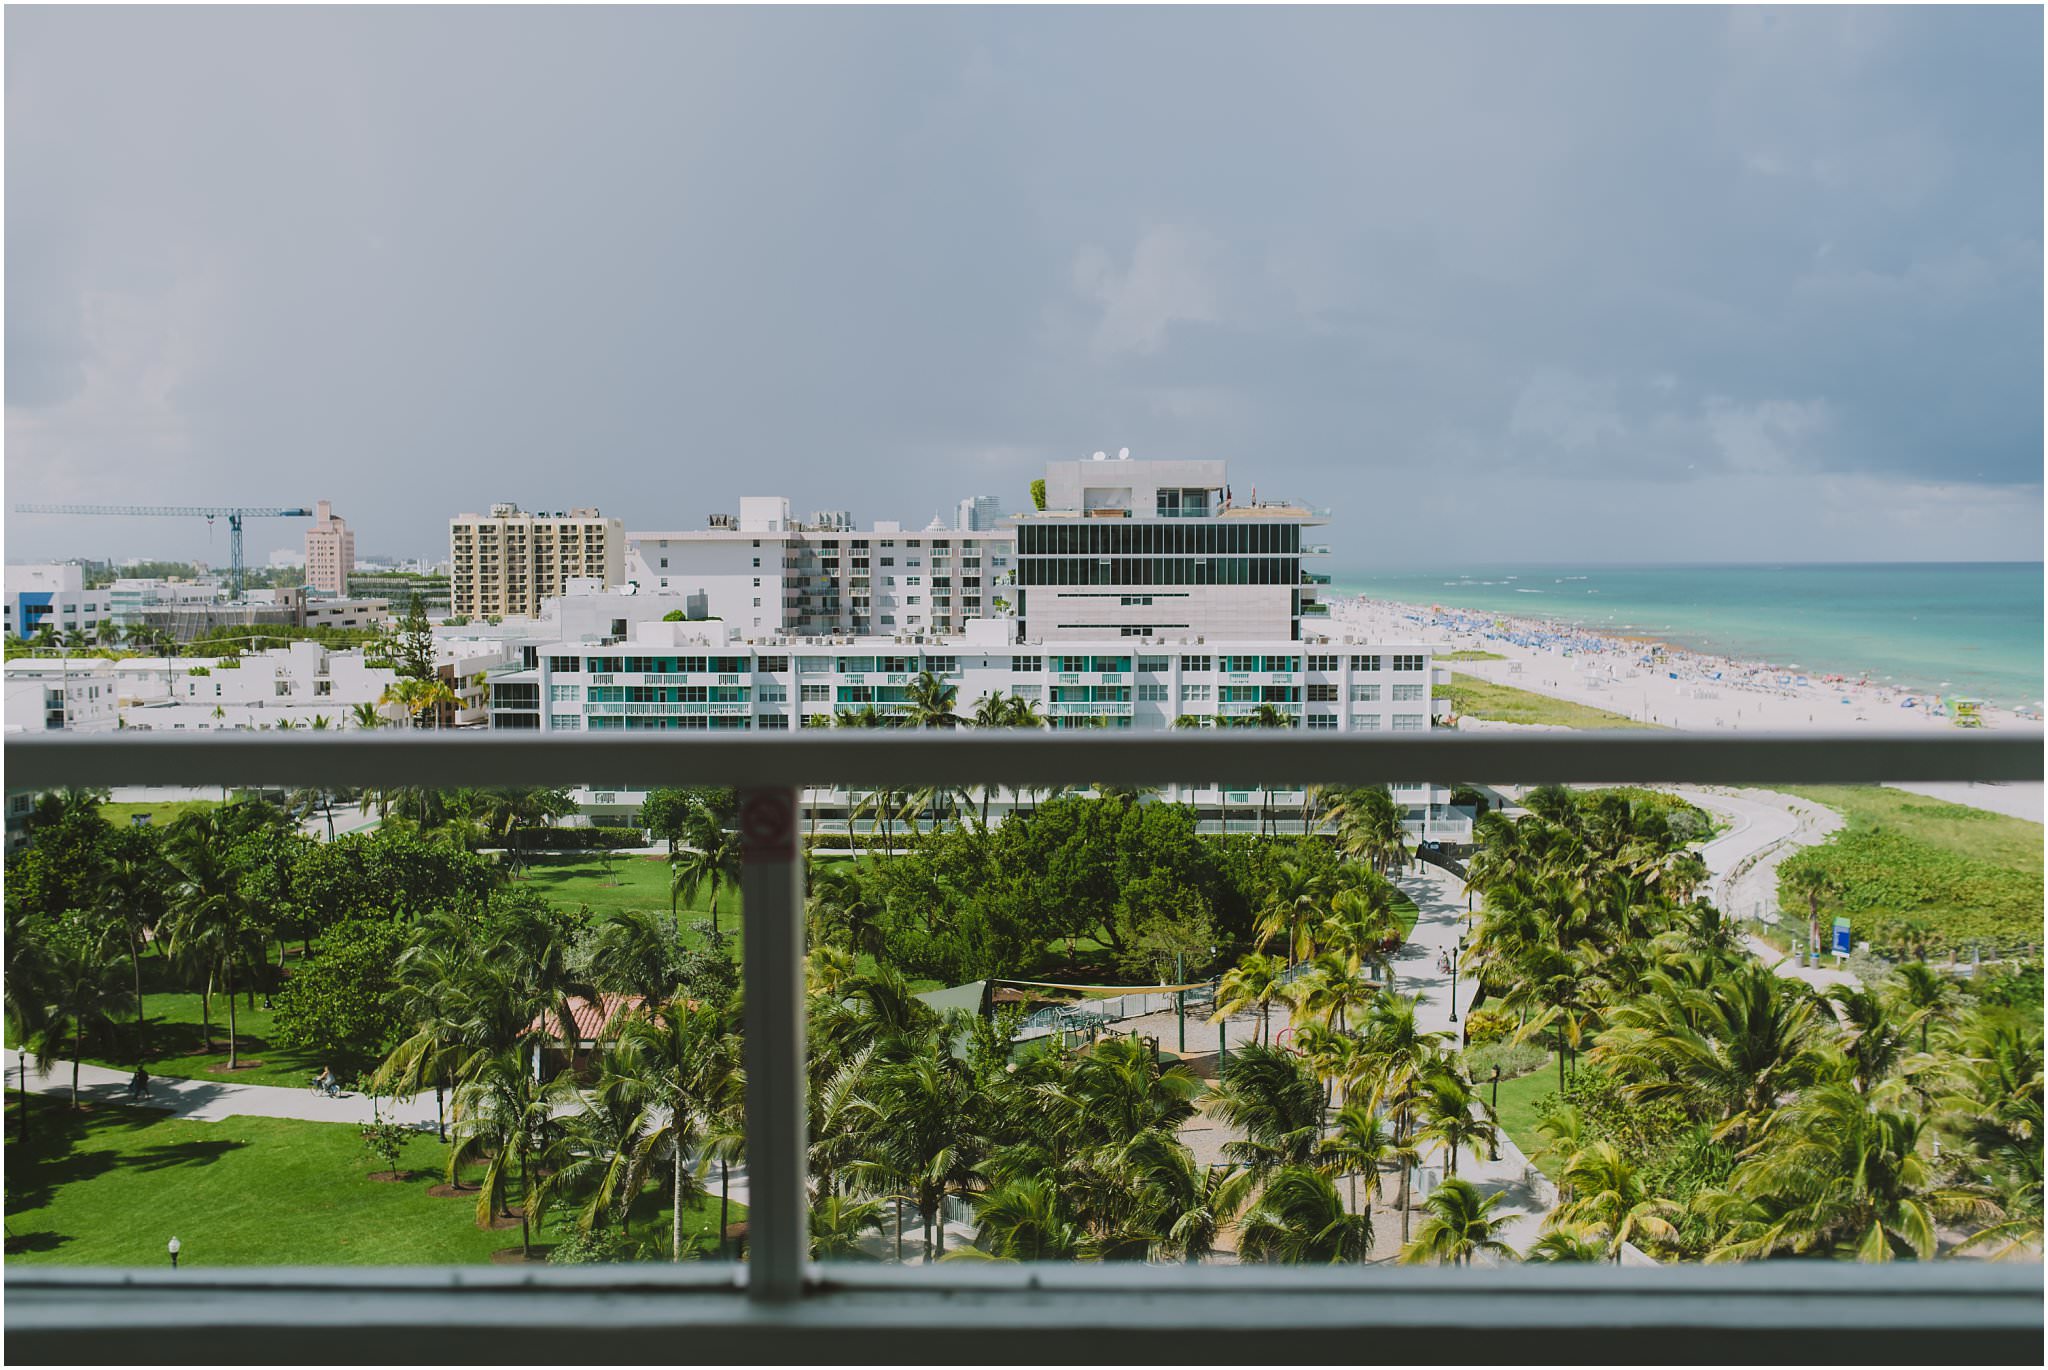 Balcony view of South Beach from the Stanton